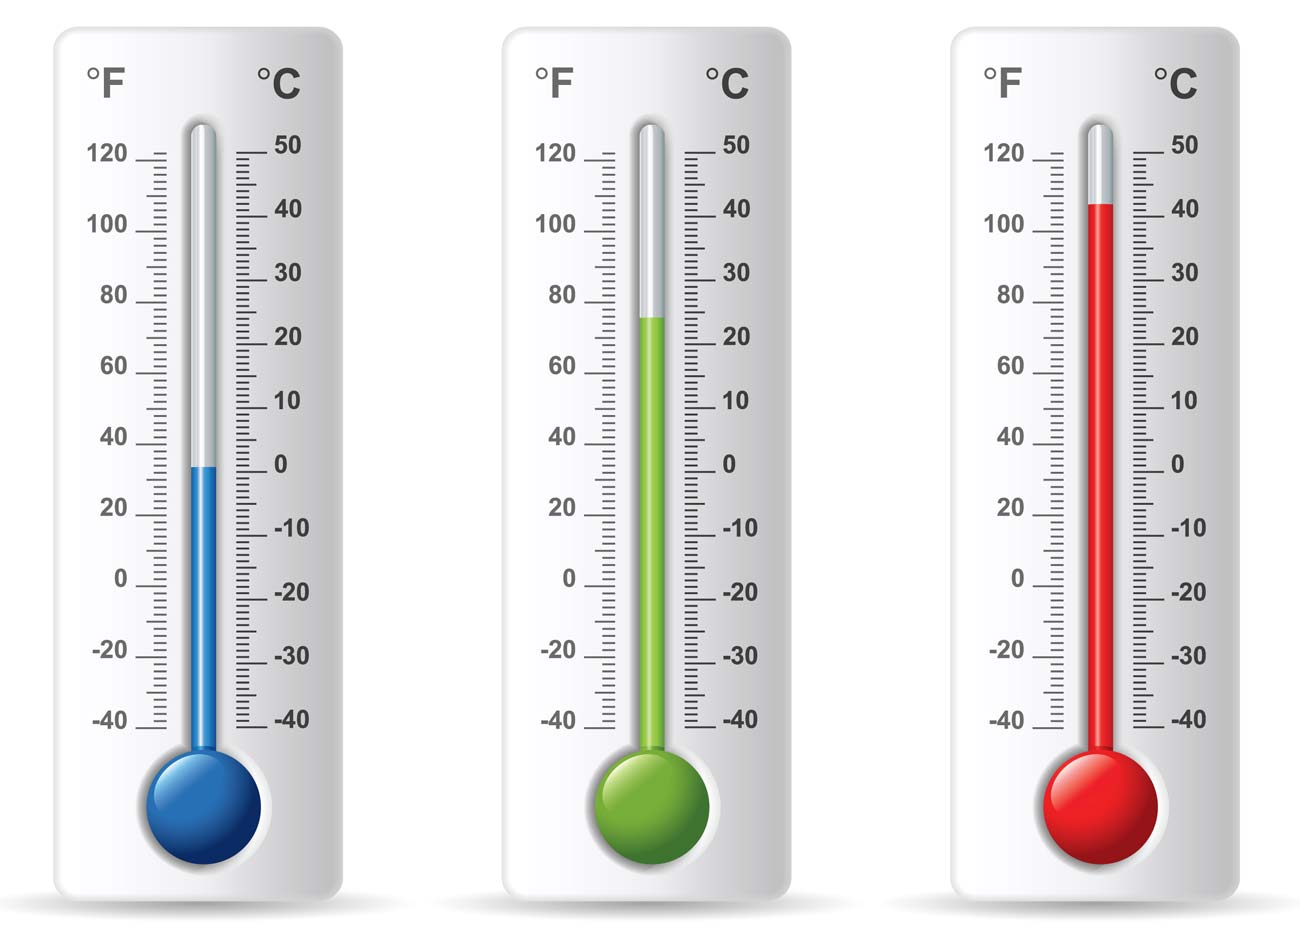 Celsius to fahrenheit thermometer